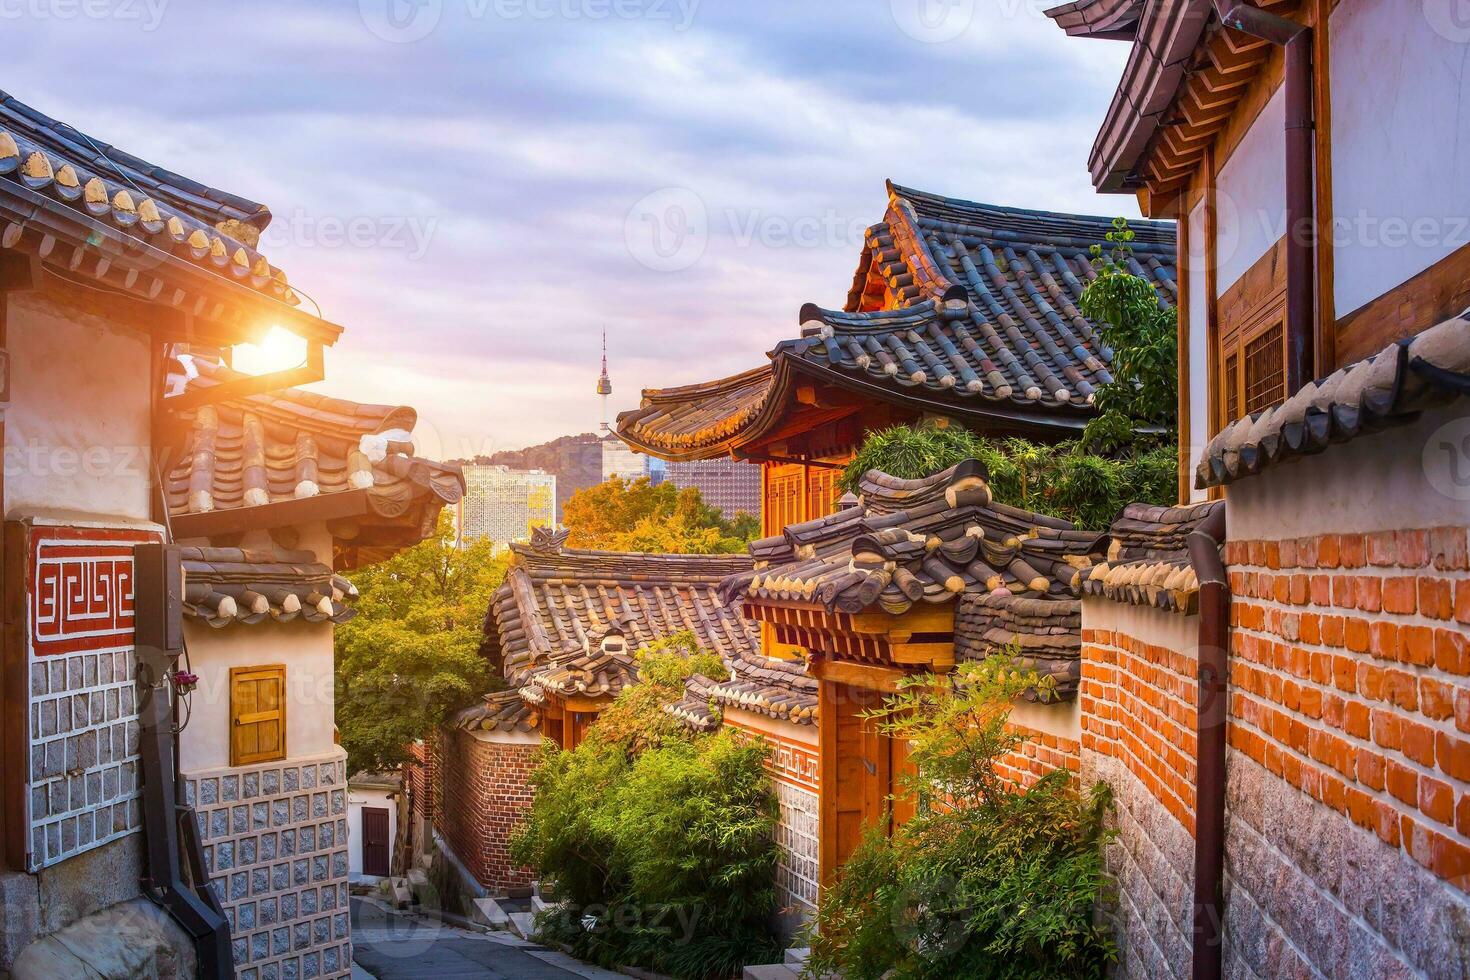 Bukchon Hanok Village Is the name traditional cultural village in downtown Seoul in the morning, with beautiful shining light, South Korea. photo